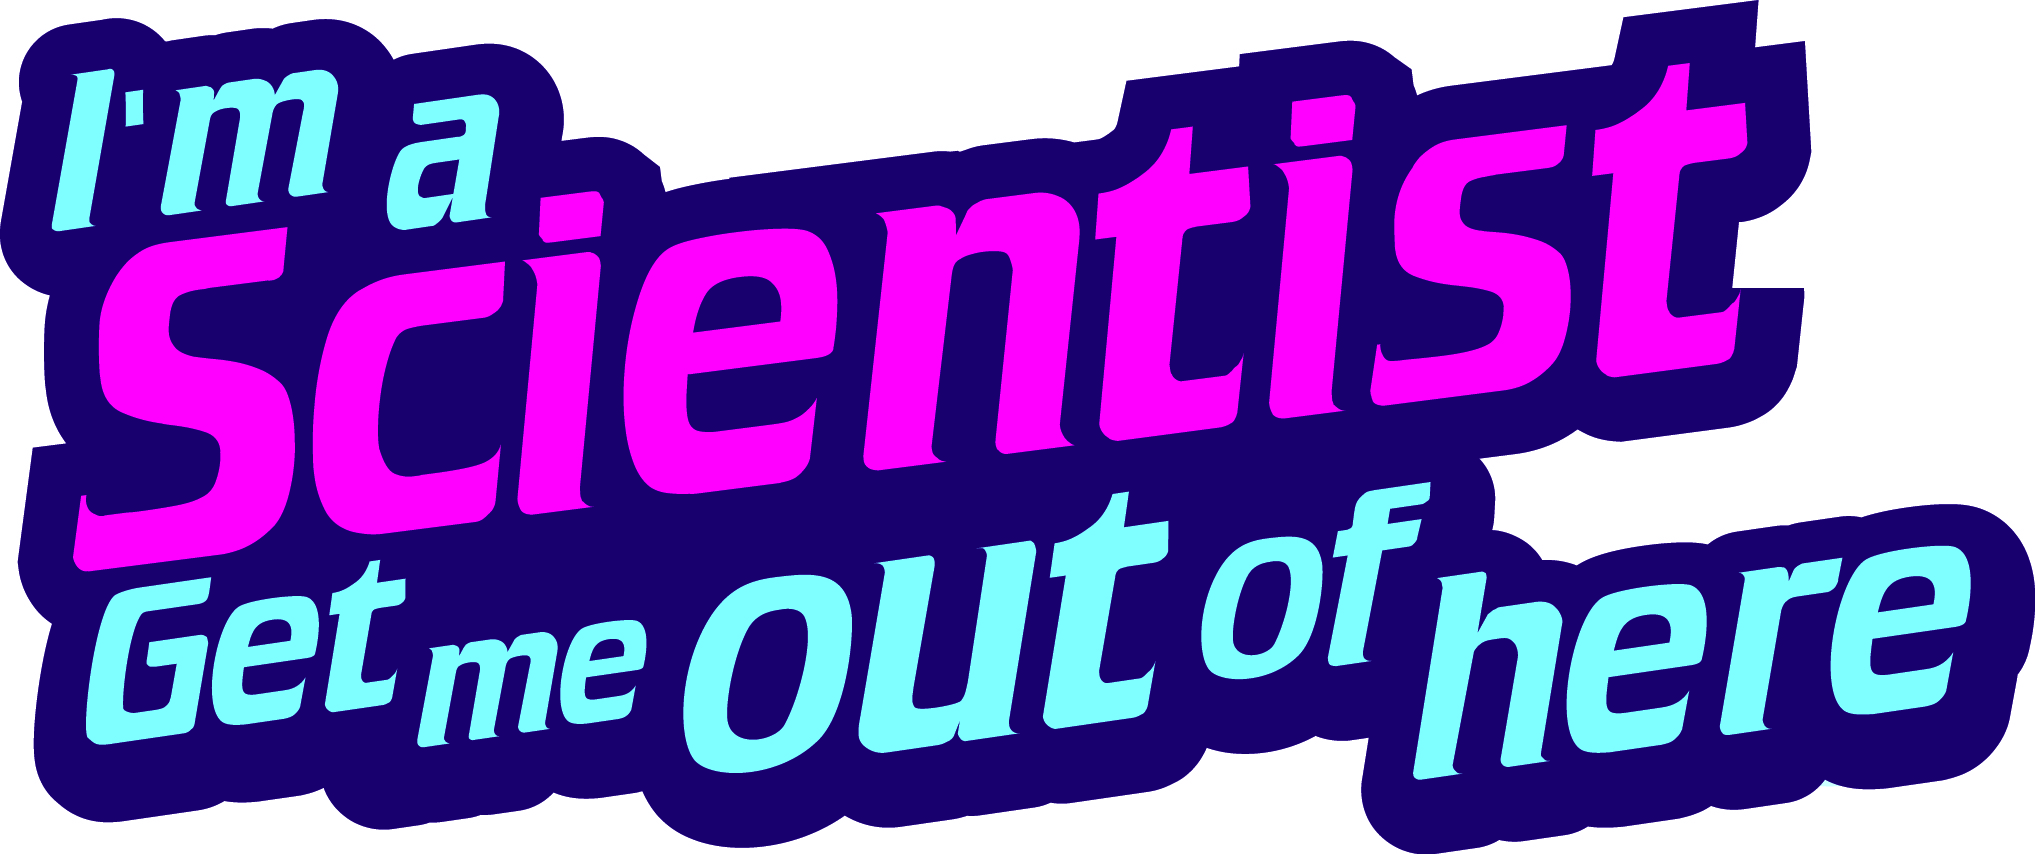 I'm_a_Scientist,_Get_me_out_of_here!_logo.jpg